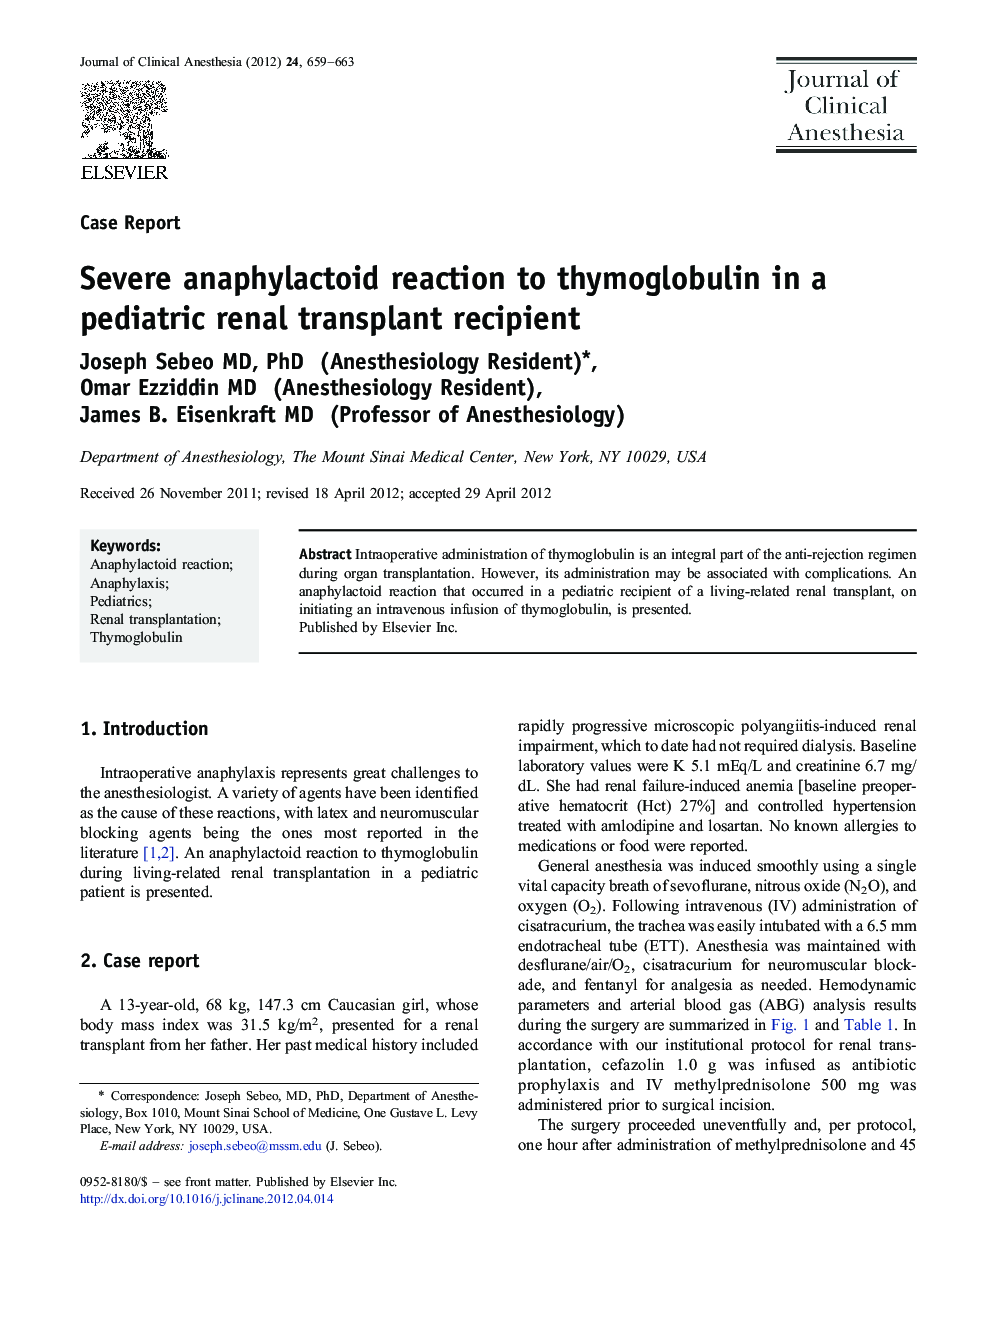 Severe anaphylactoid reaction to thymoglobulin in a pediatric renal transplant recipient